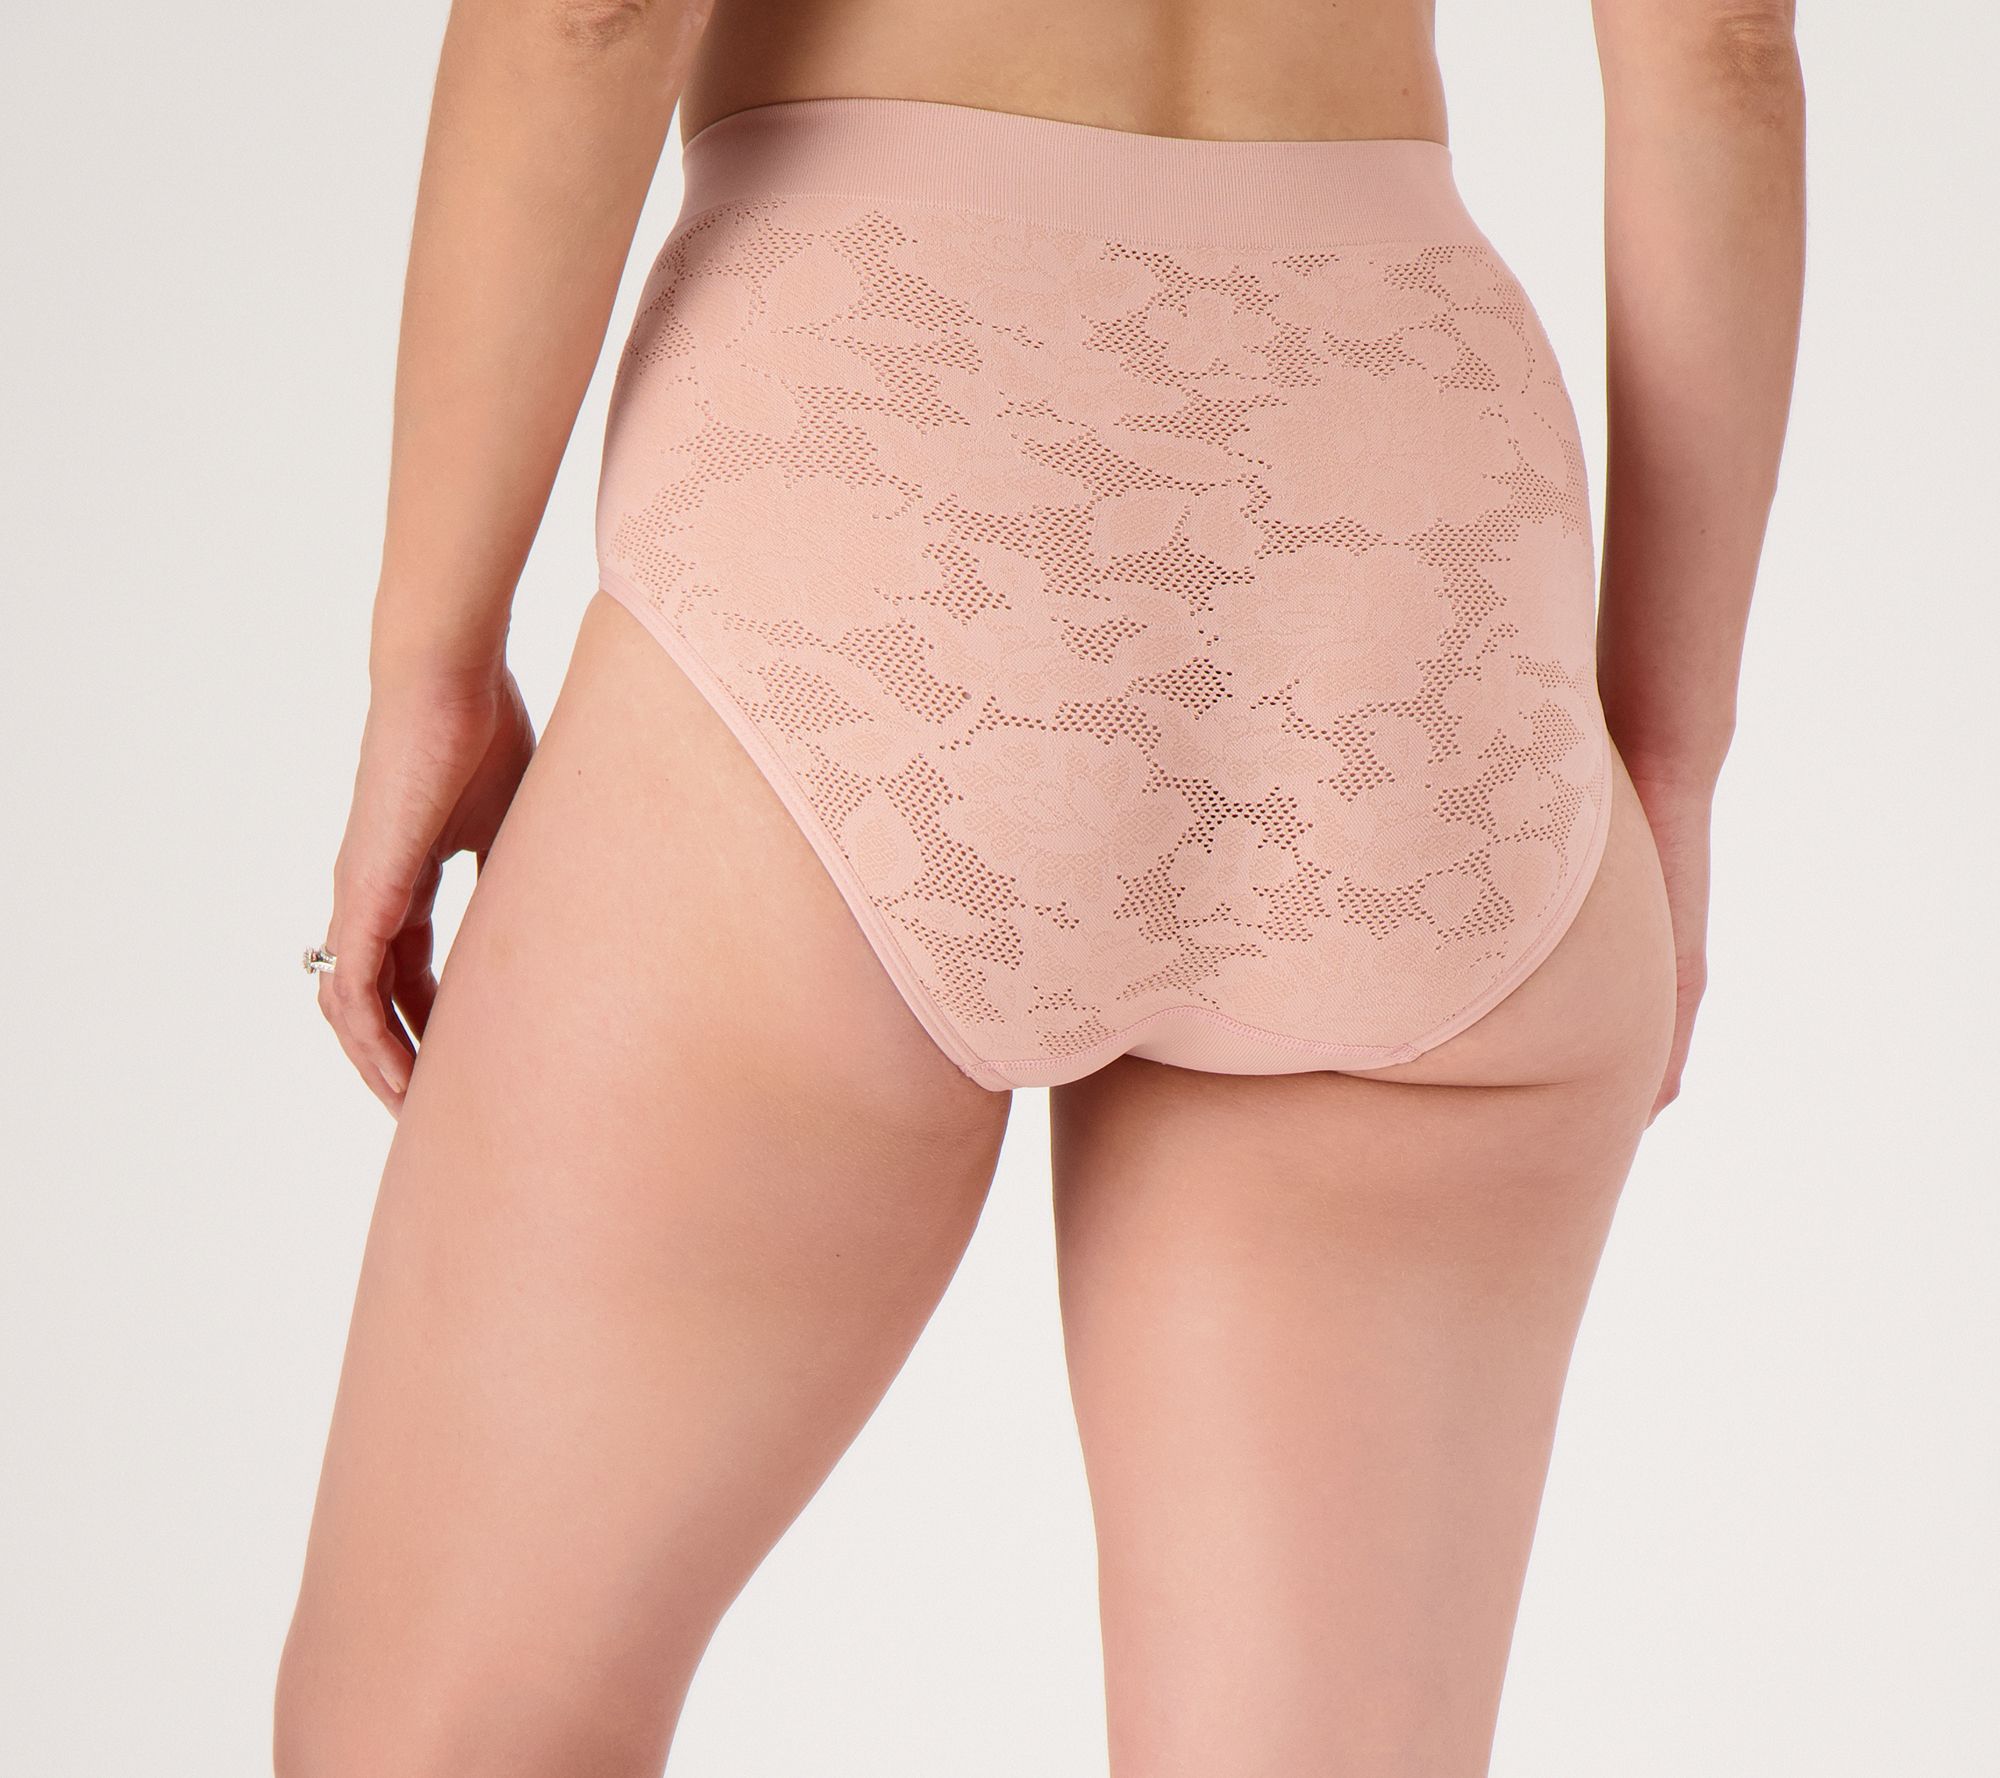 BREEZIES Soft Support Lace BRIEF Panties- Sets of Two or Three Pairs